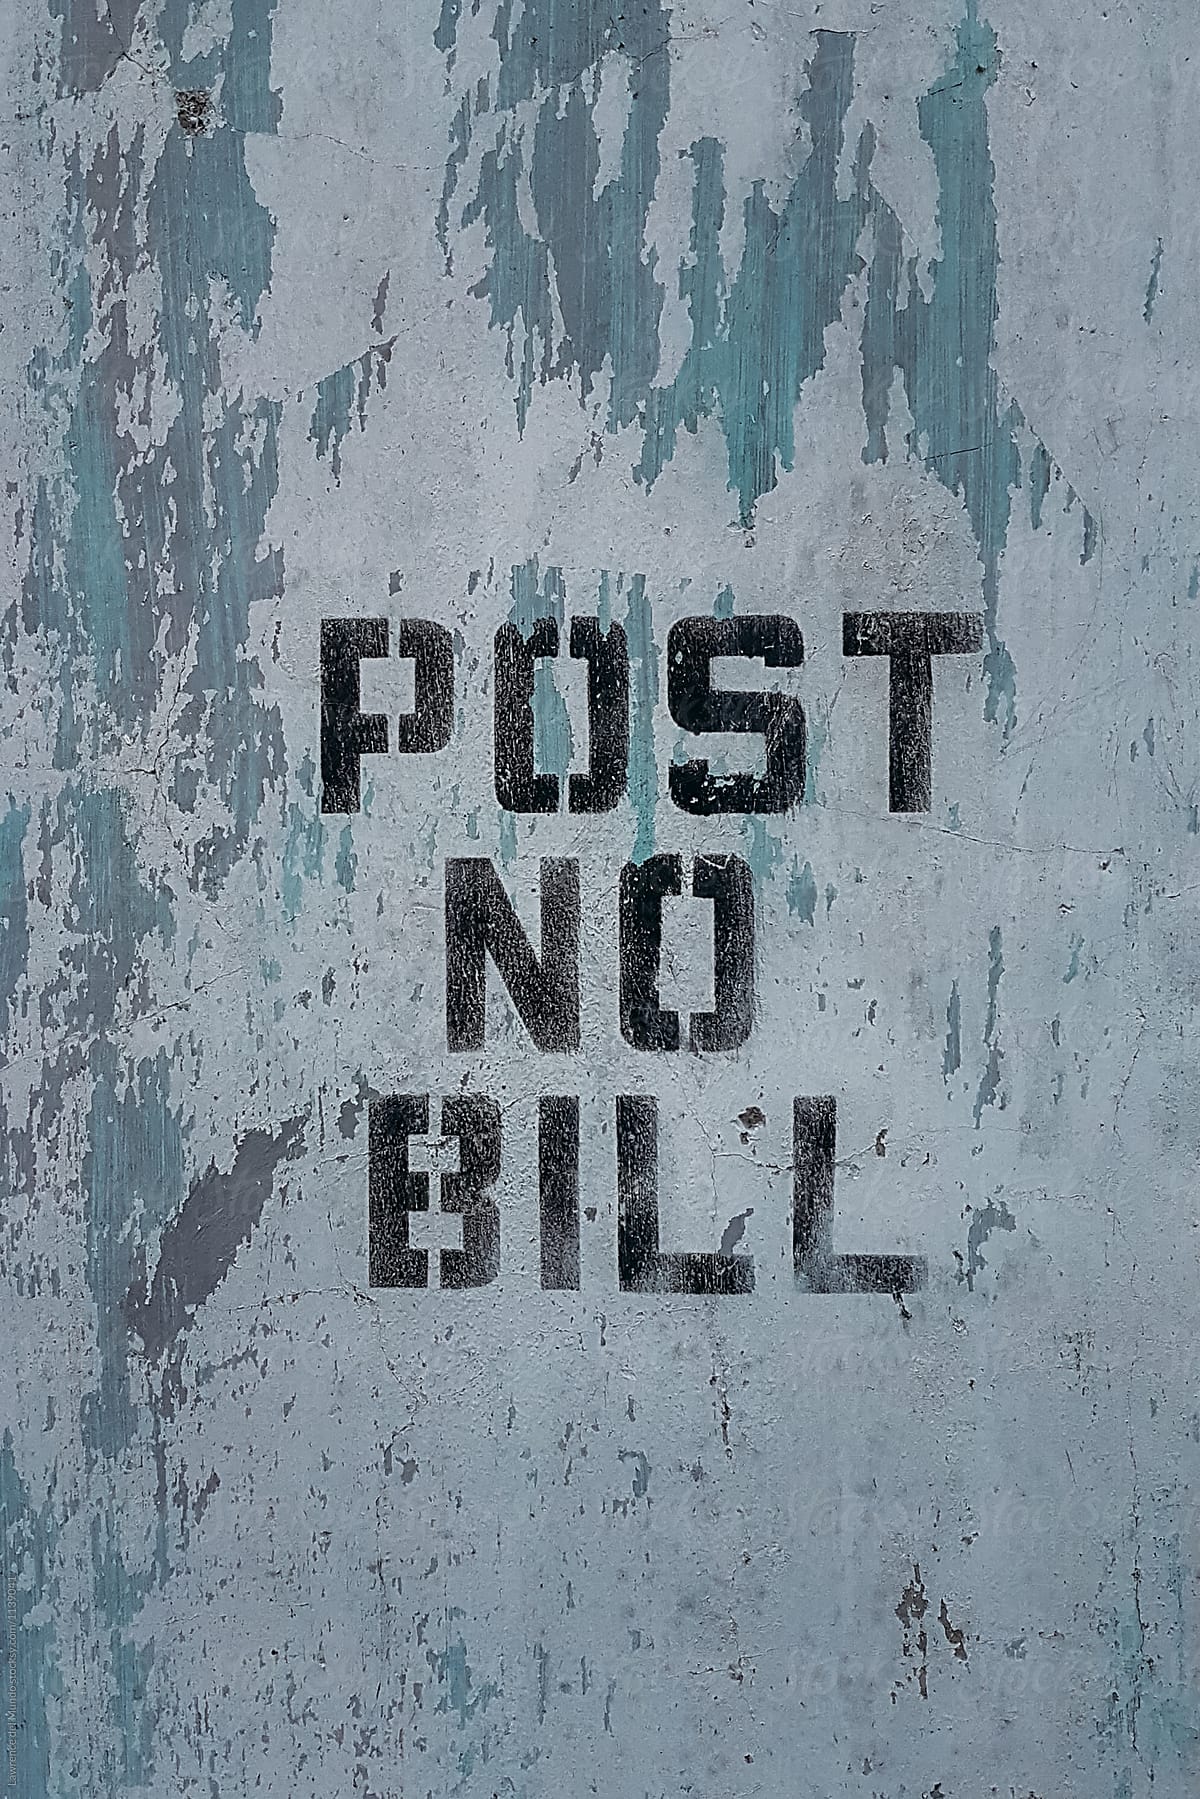 Post no bill sign on a wall.